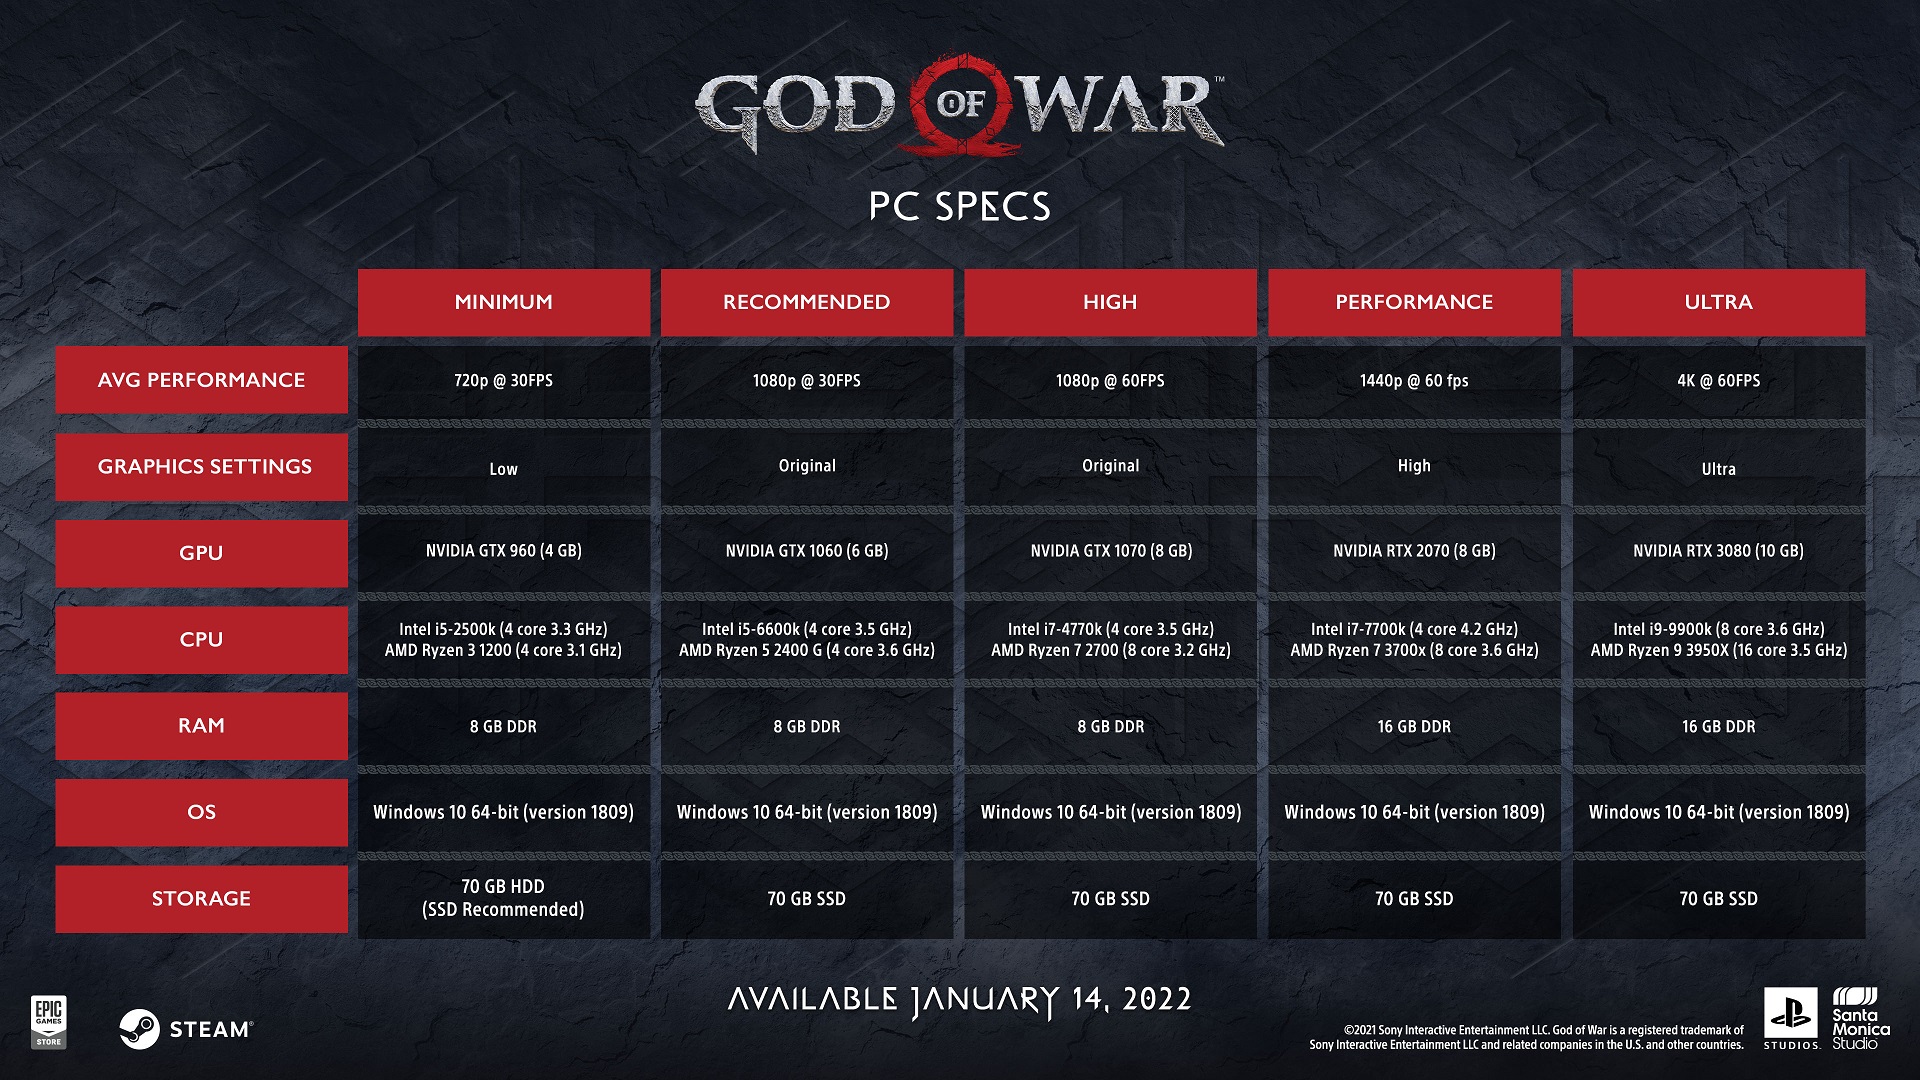 System requirements for God of War PC